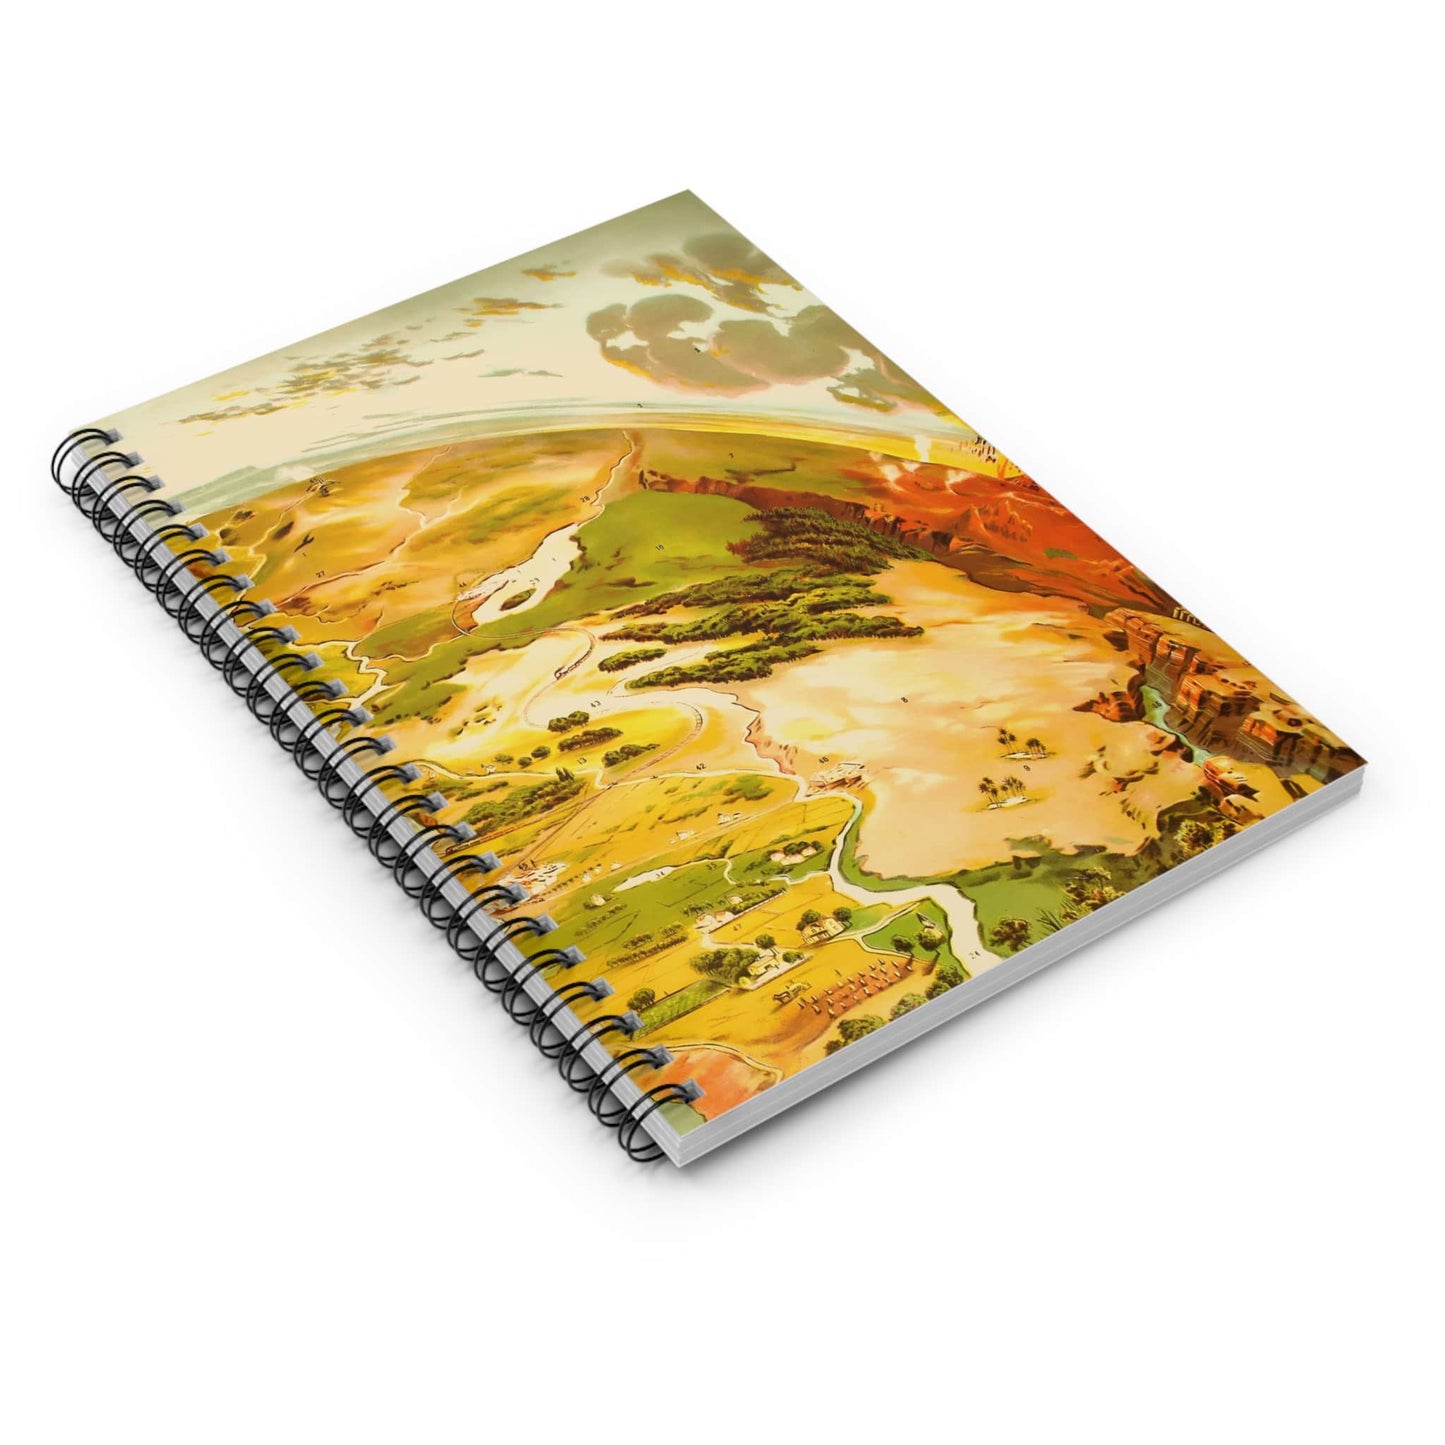 Pictorial of Earth Spiral Notebook Laying Flat on White Surface